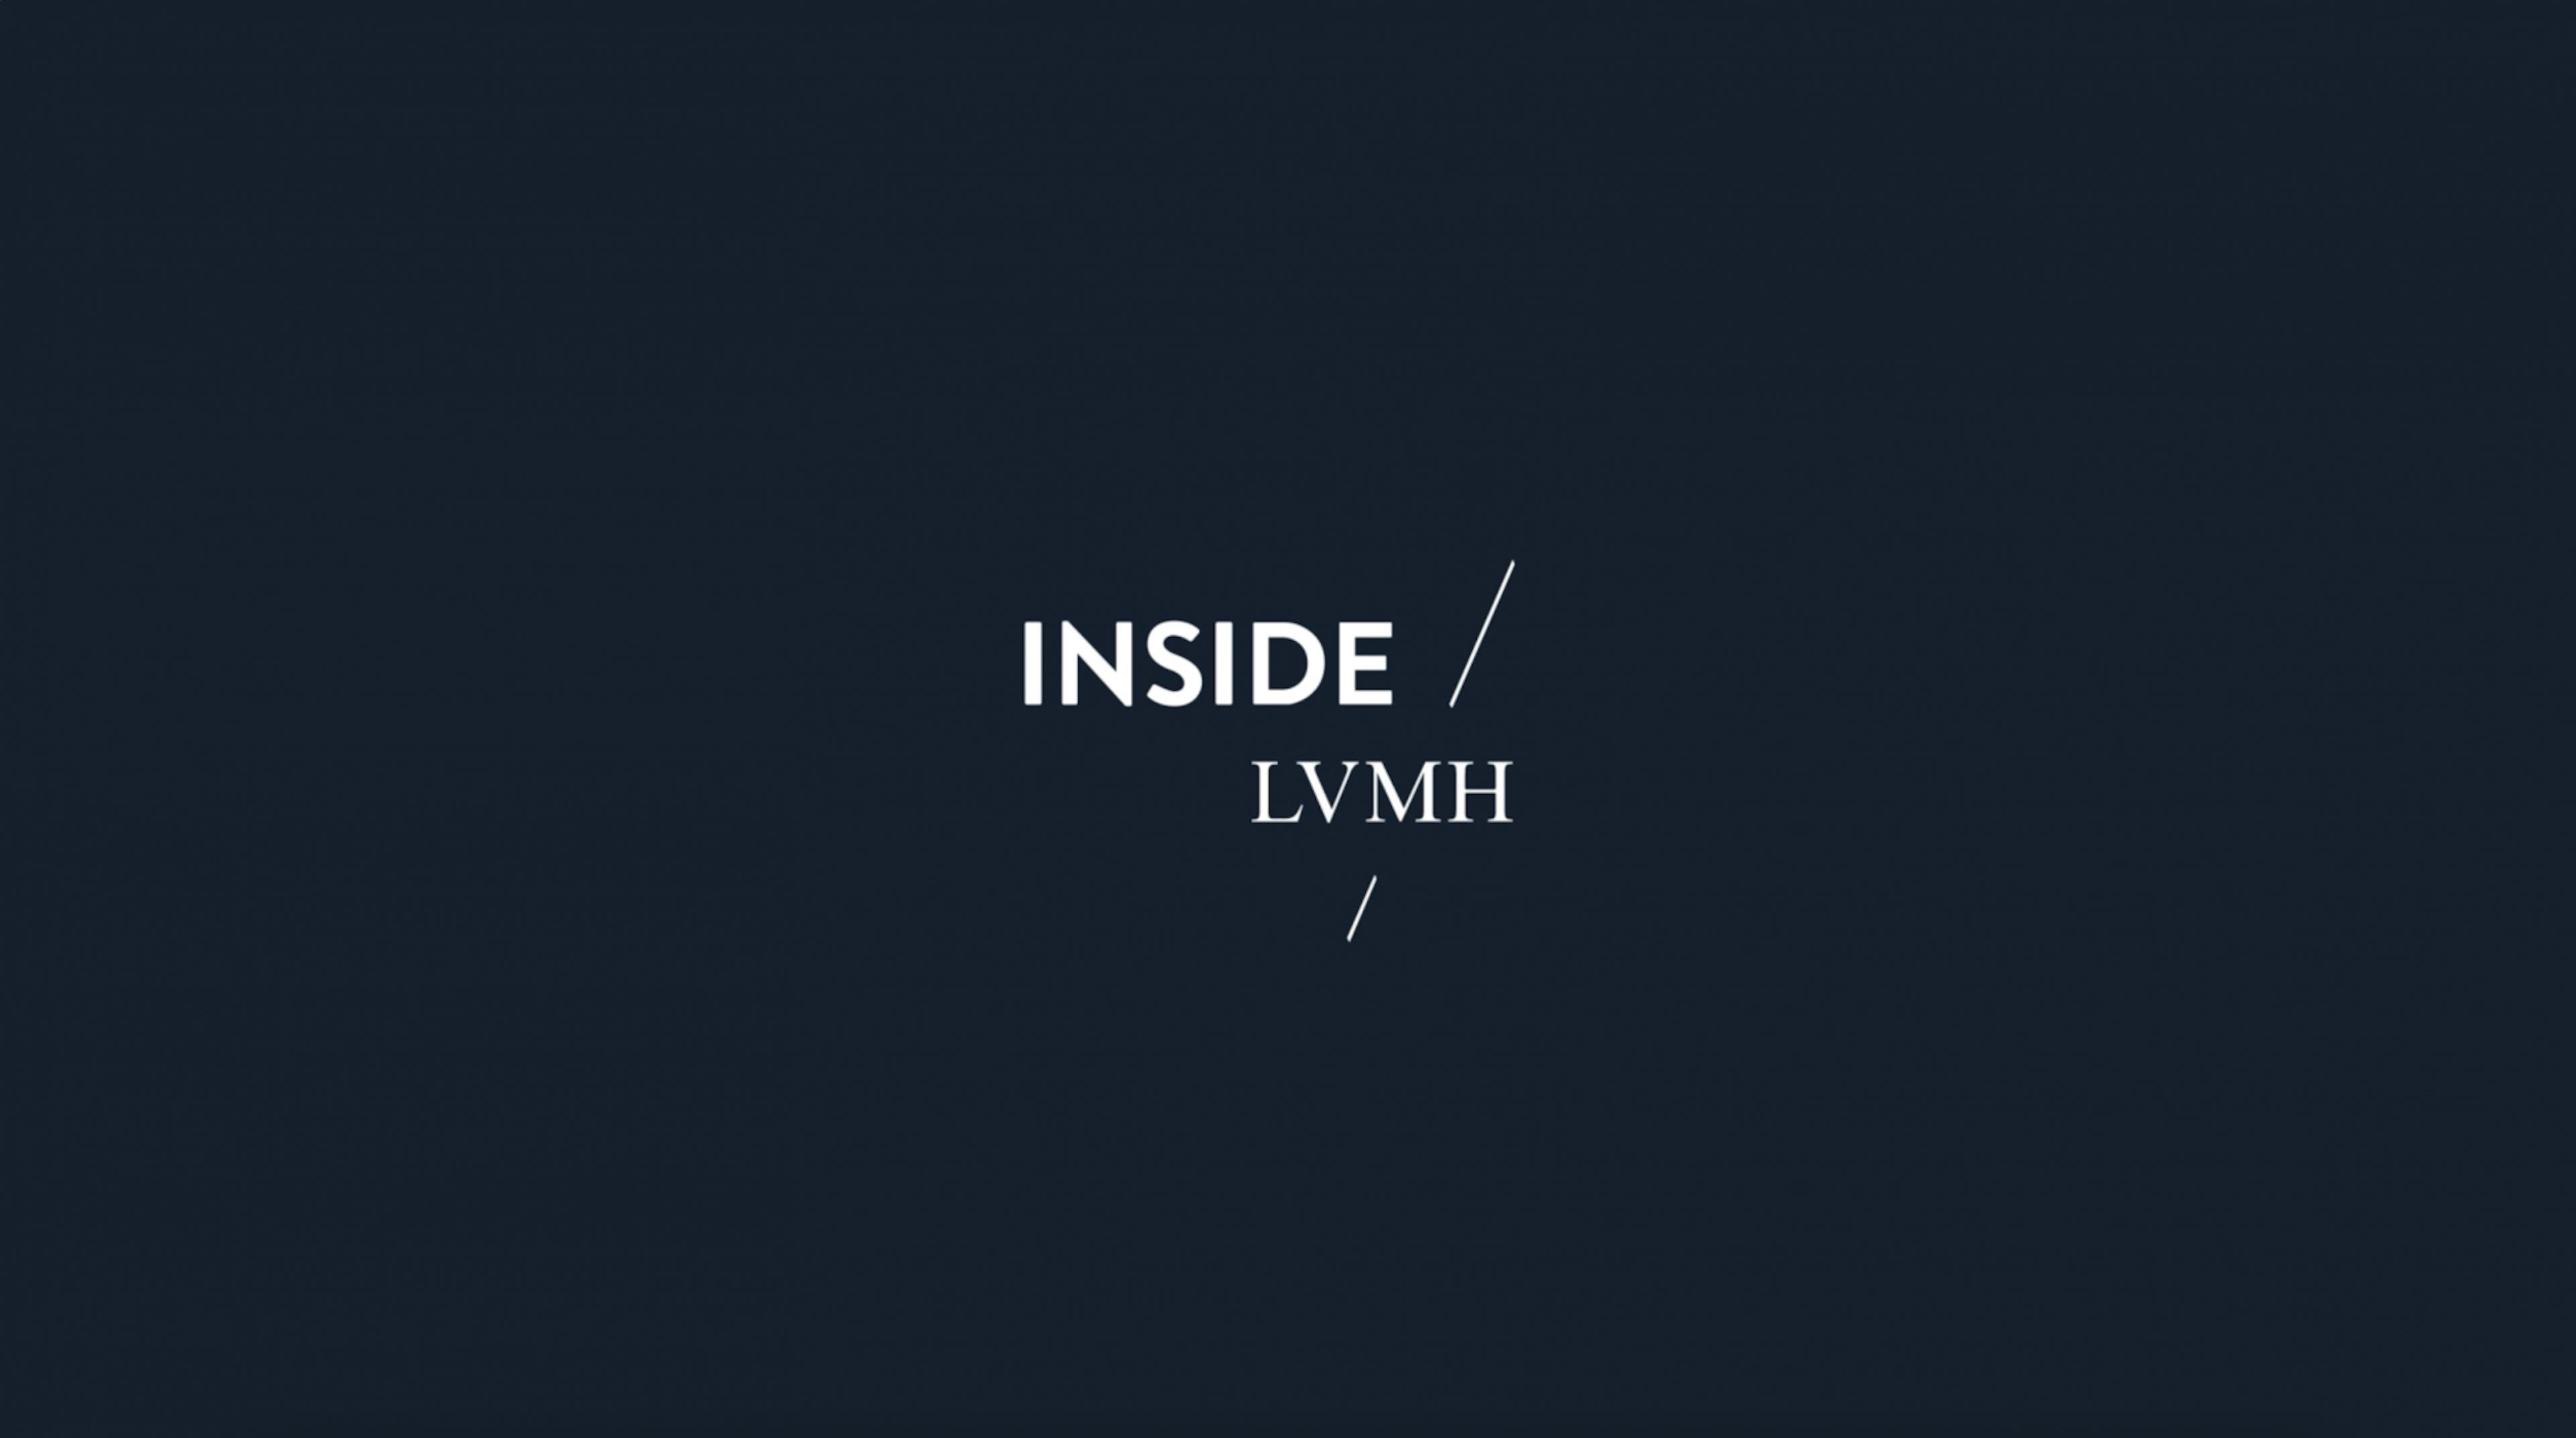 Cover Register NOW to the INSIDE LVMH Certificate